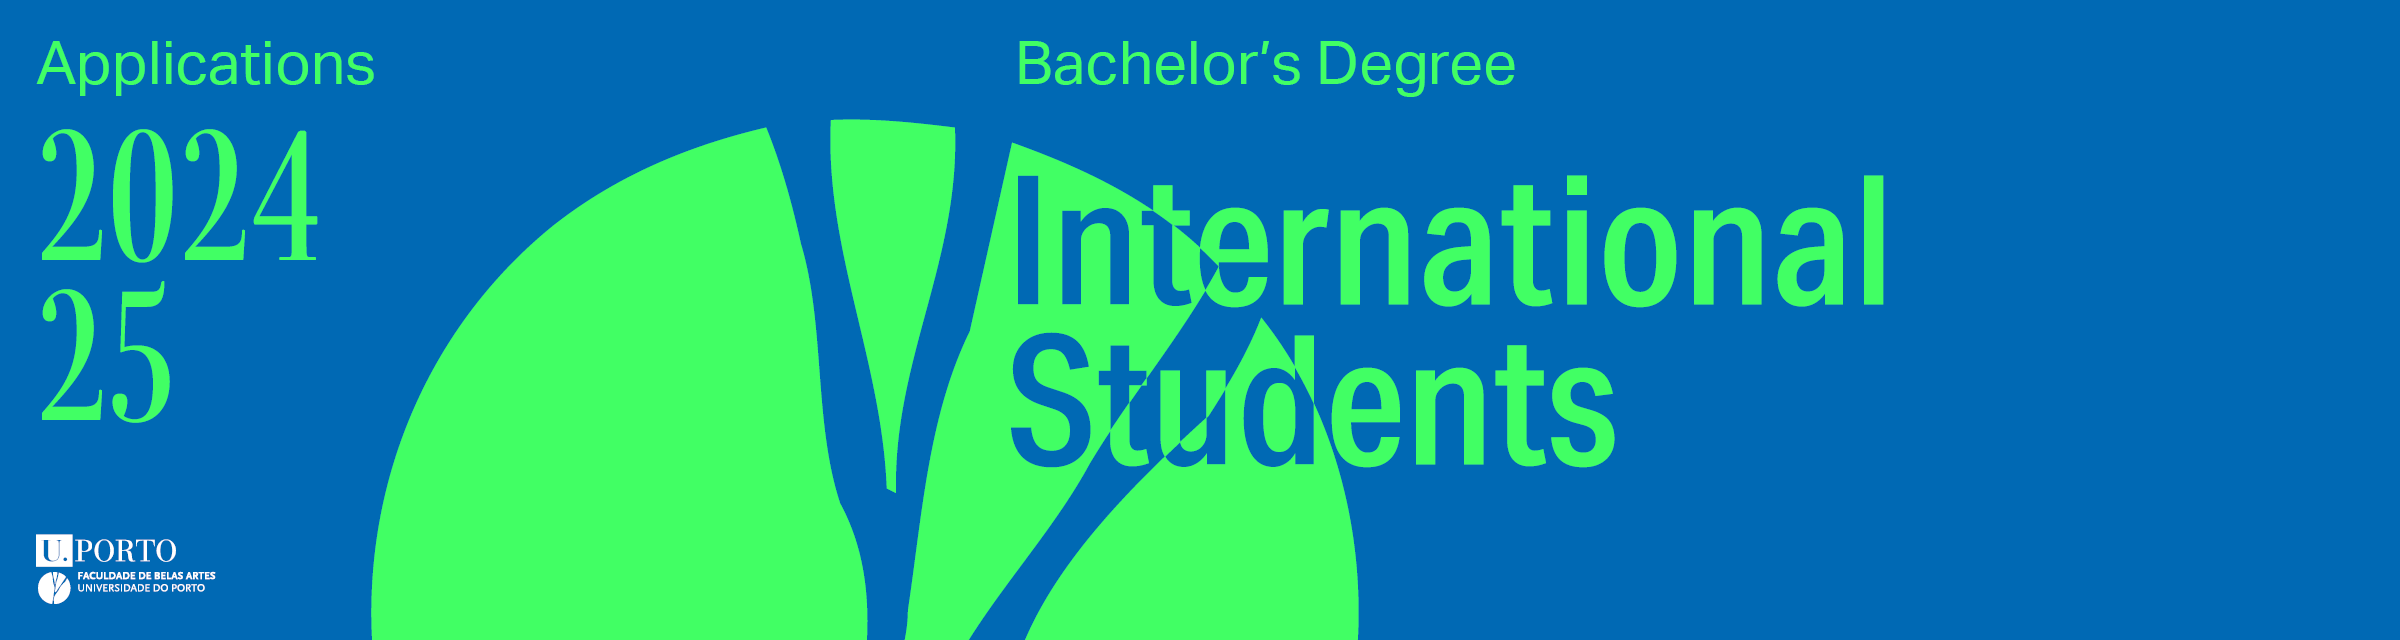 BACHELOR'S DEGREE Applications | International Student Contest 2024/2025